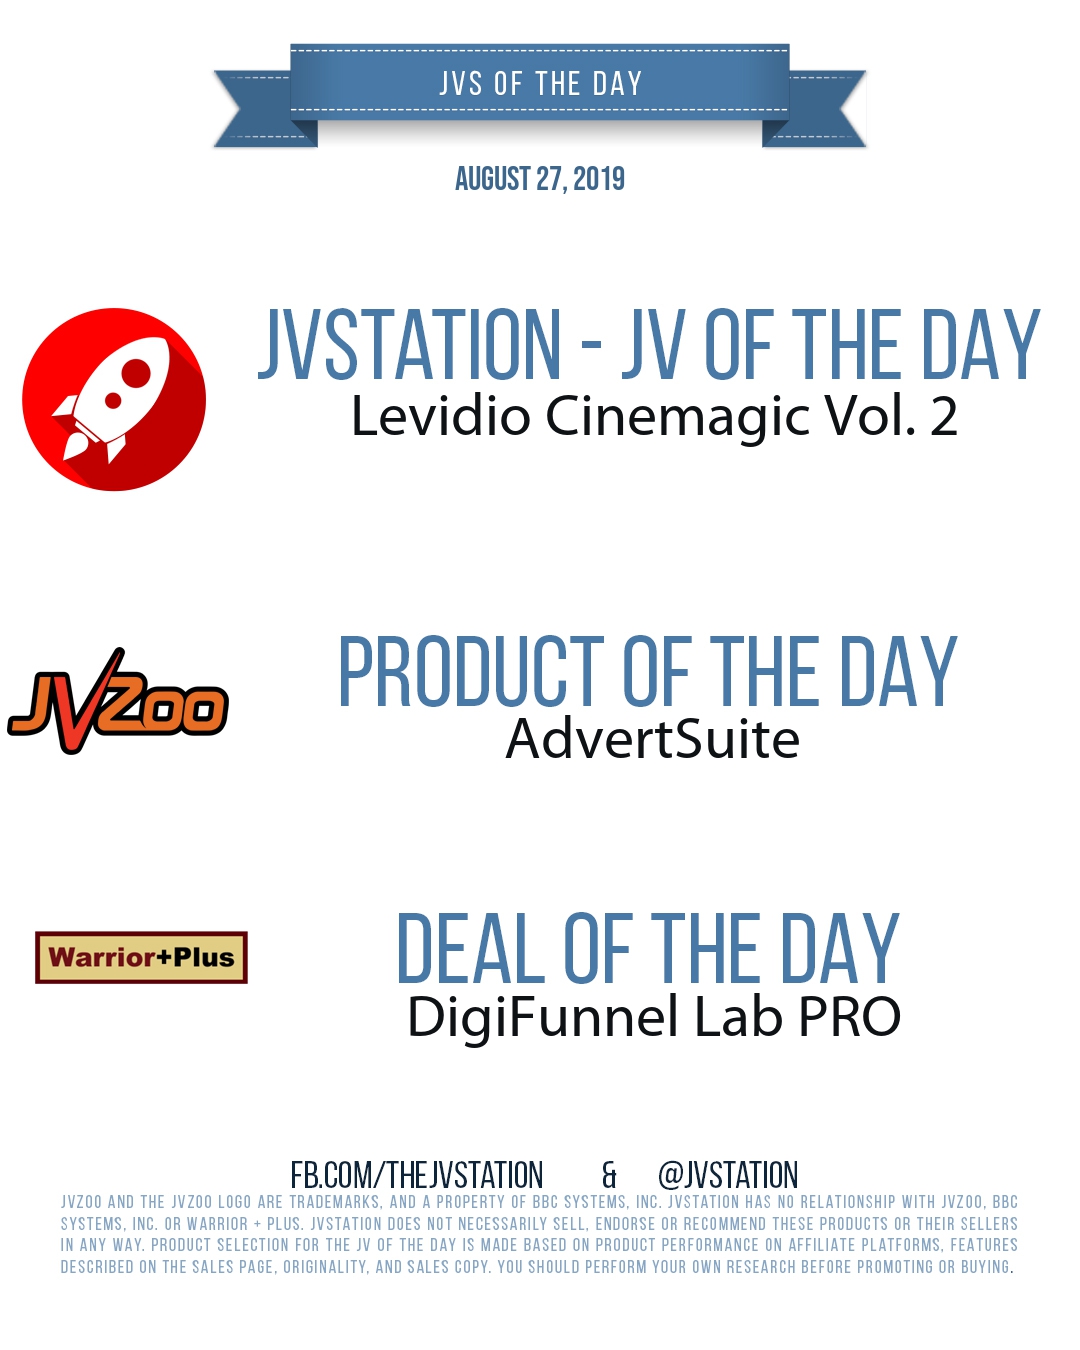 JVs of the day - August 27, 2019